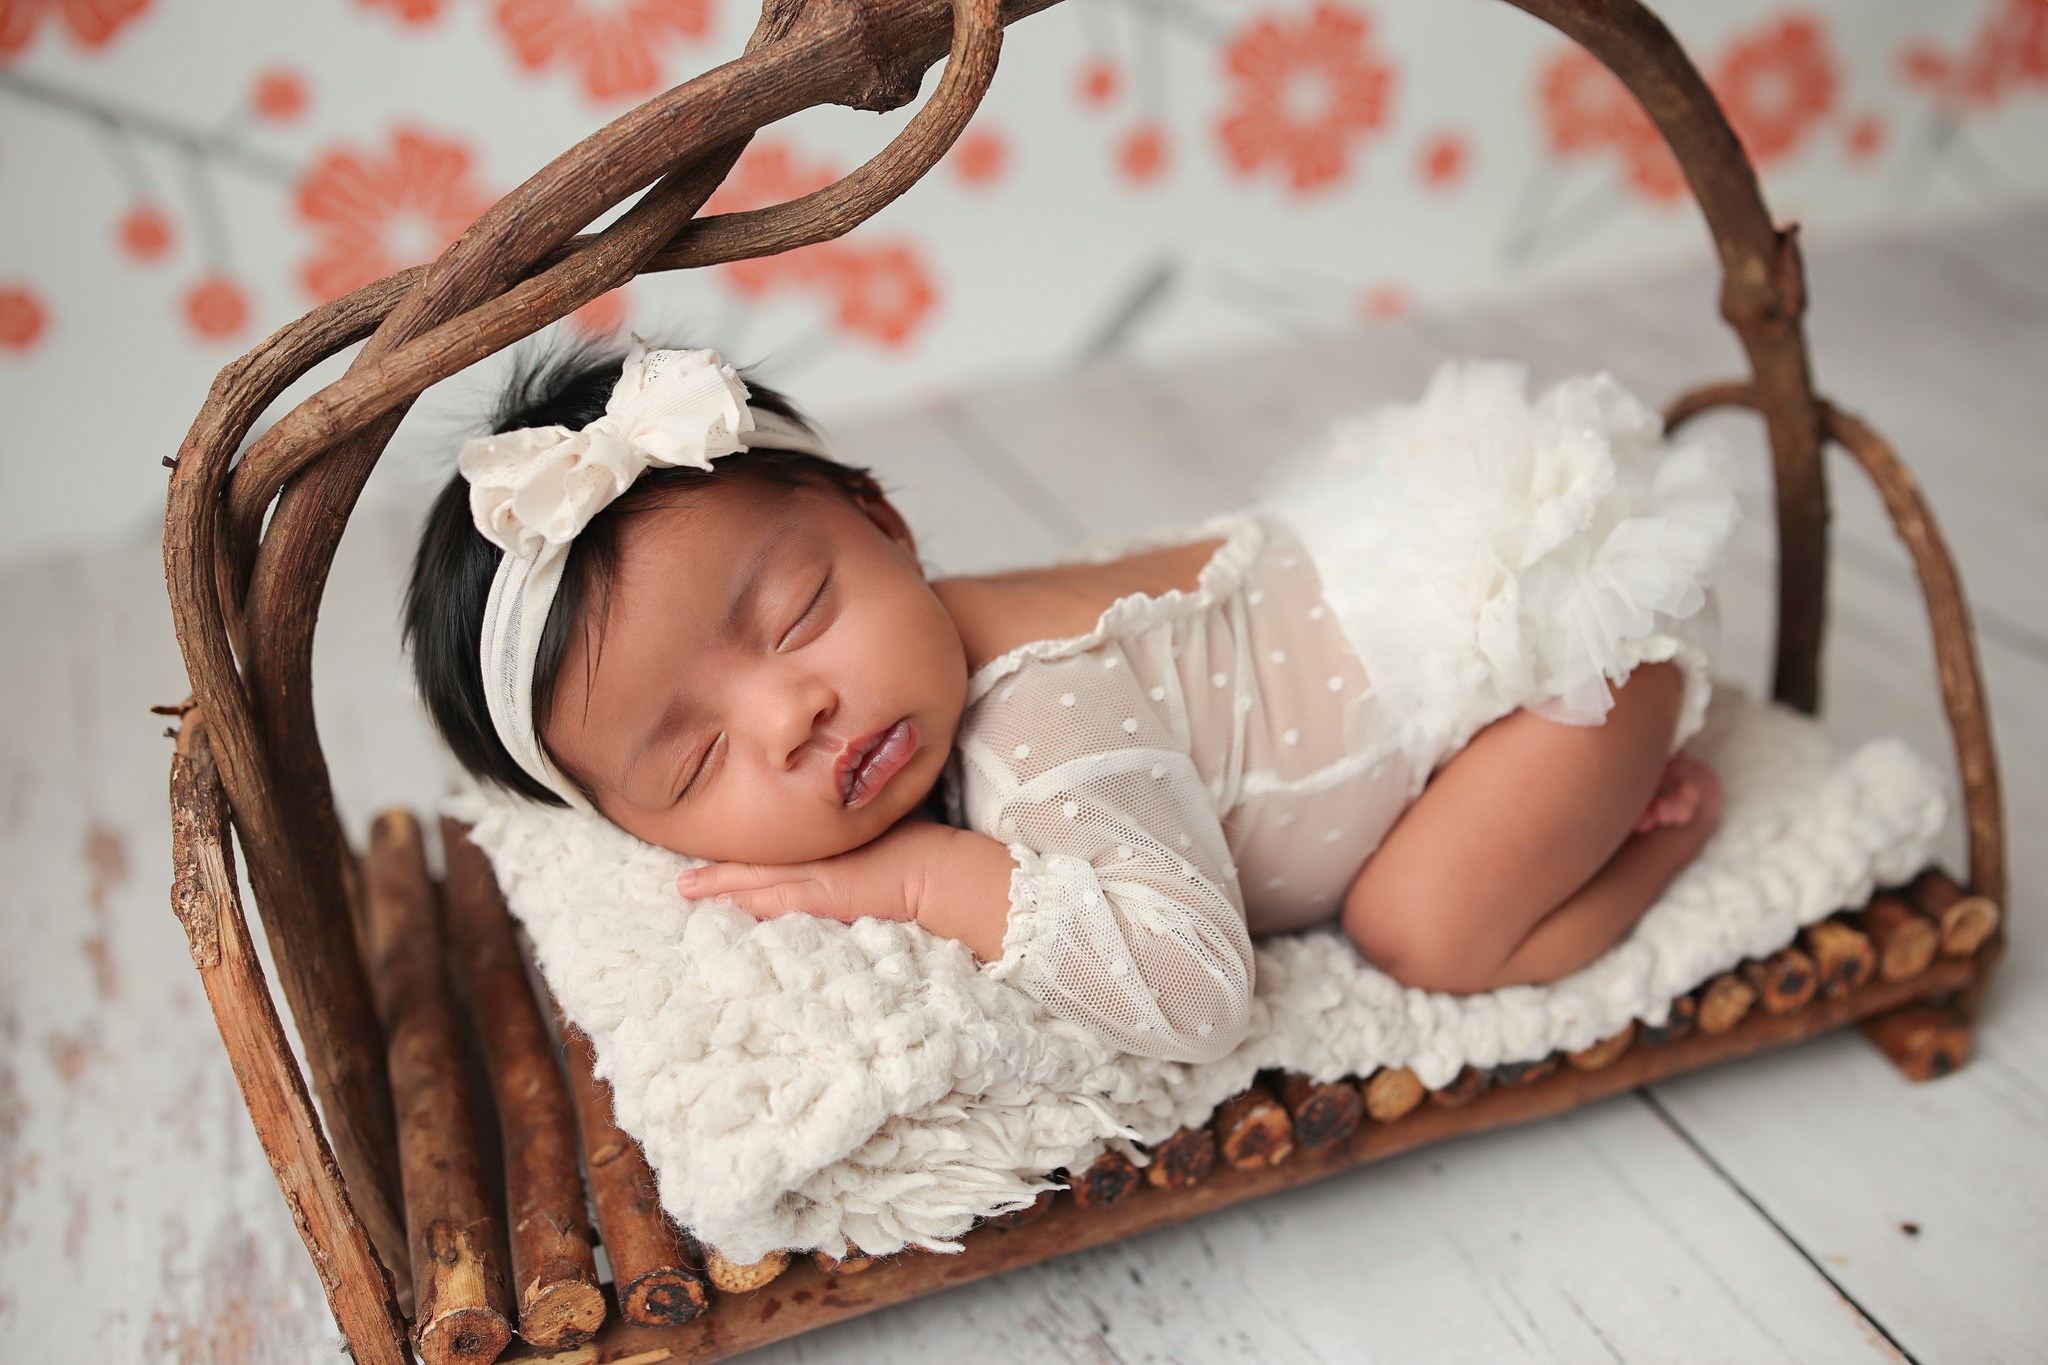 Newborn baby sleeping on wicker bed in white lacey outfit.